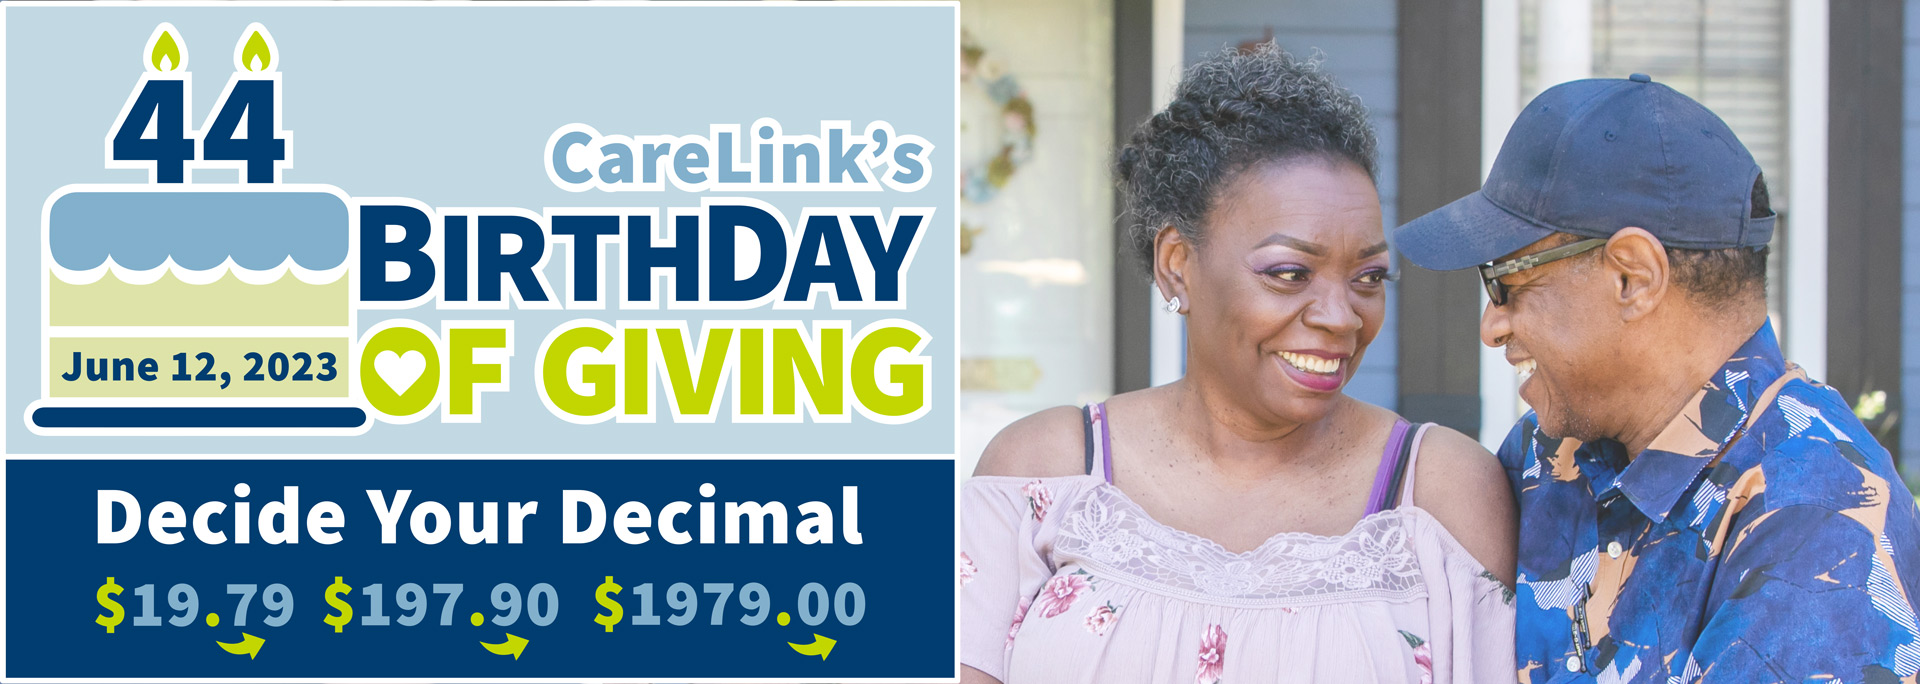 CareLink's Birthday of Giving, June 12, 2023